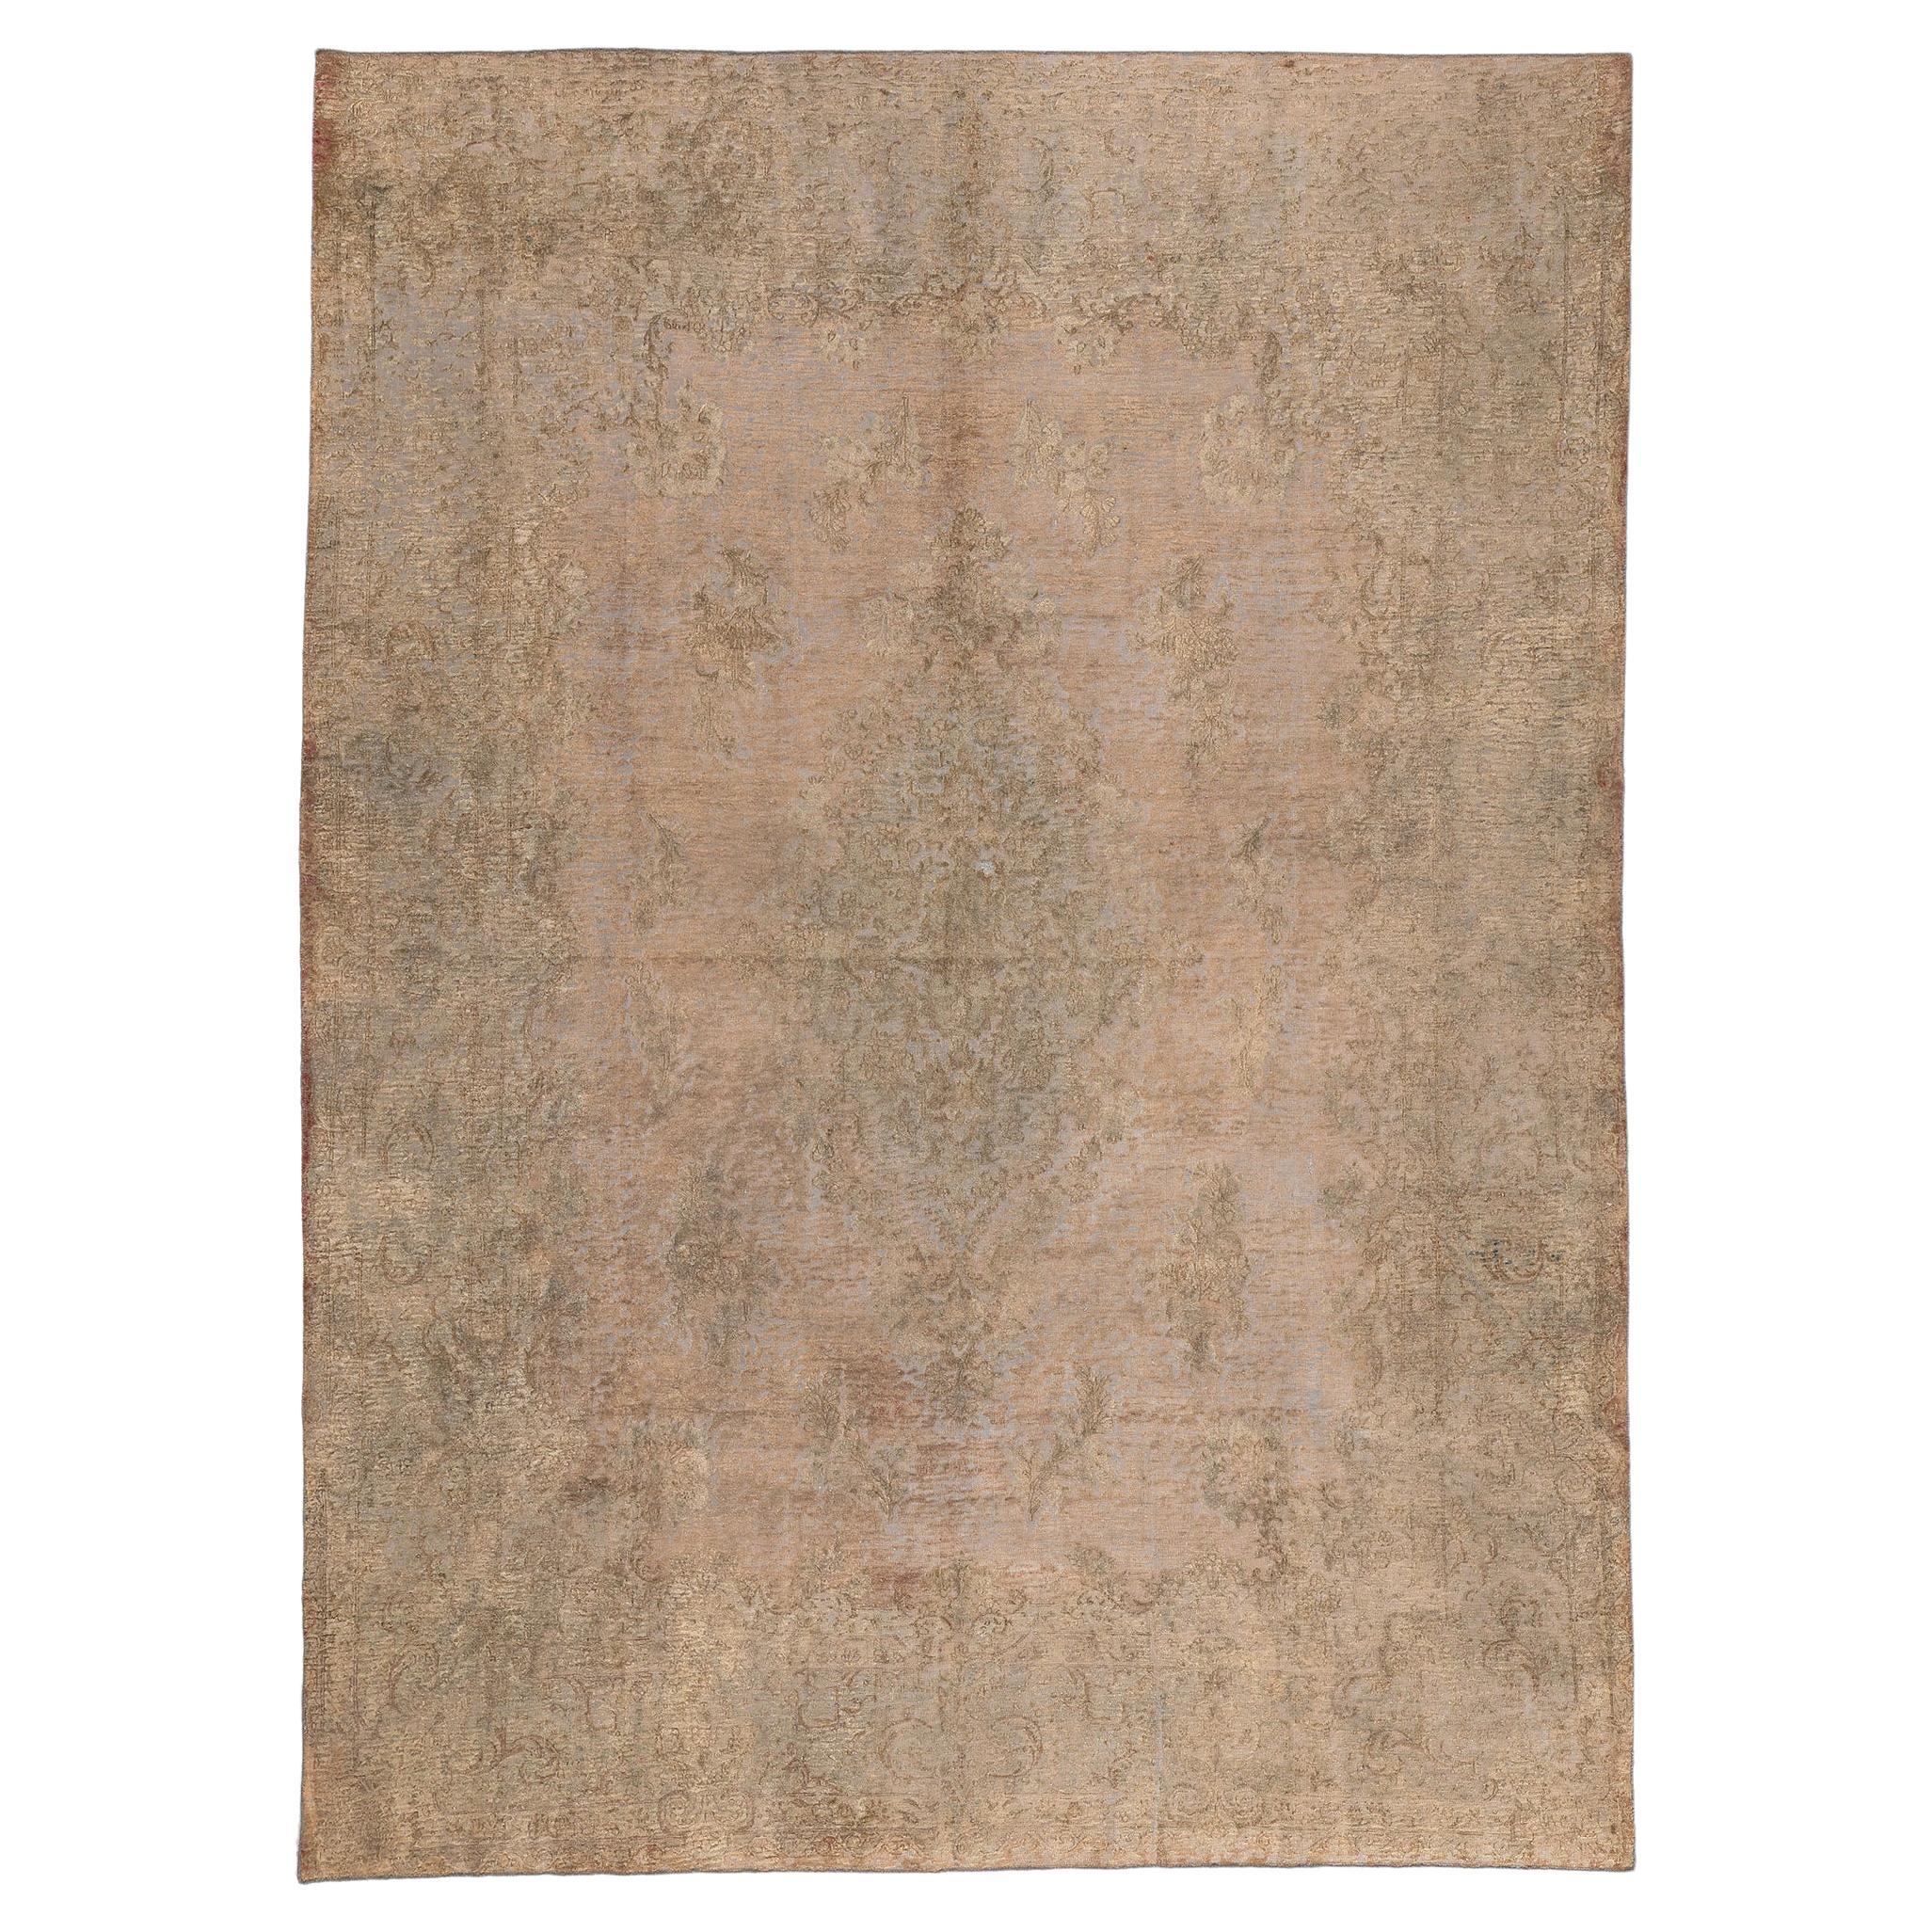 Earth-Tone Vintage Turkish Overdyed Rug, Belgian Chic Meets French Industrial For Sale